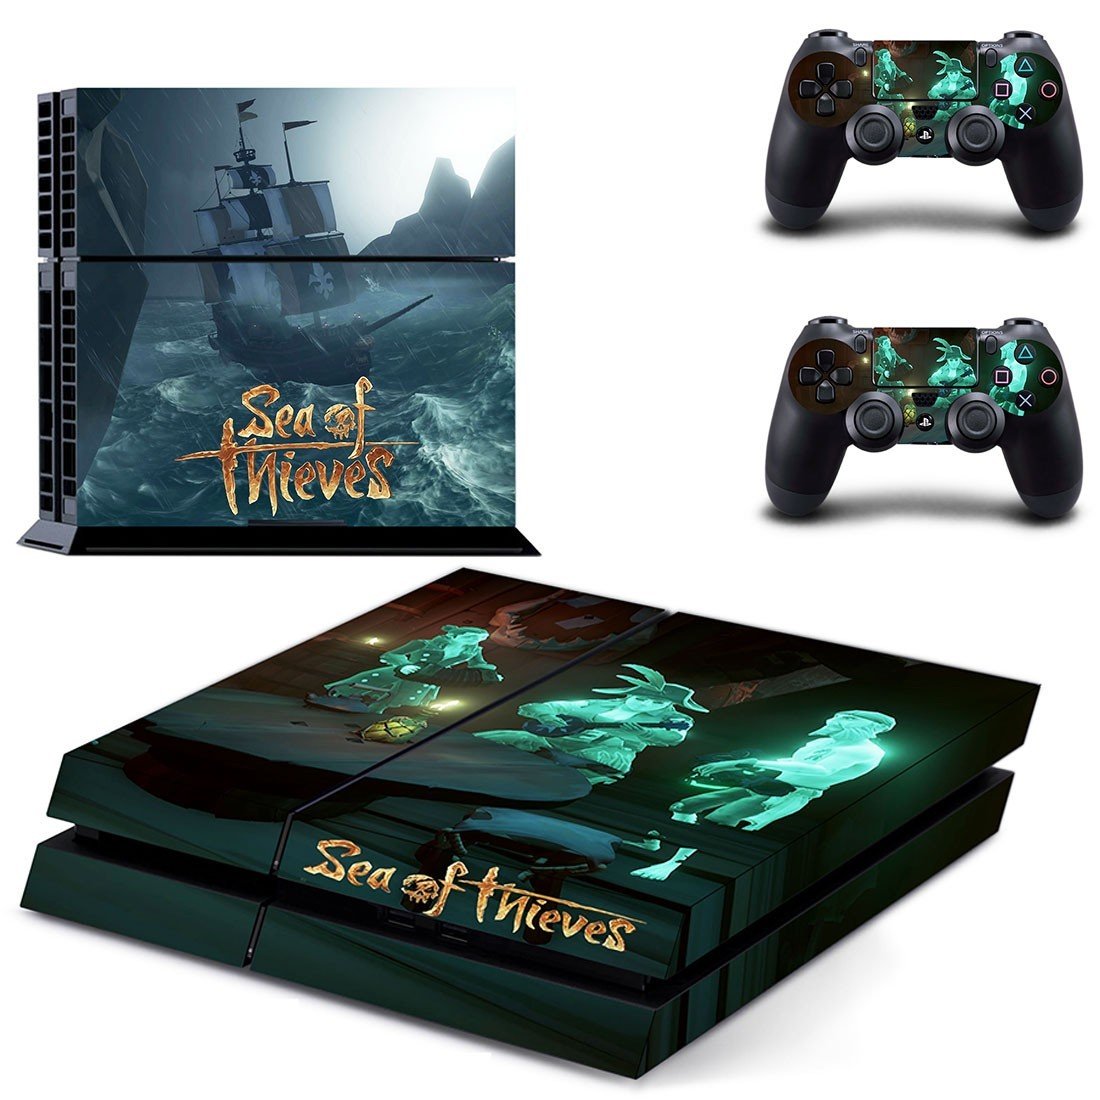 Sea of thieves ps4. Sea of Thieves на пс4. Sea of Thieves на пс4 диск. Море воров на ПС 4. Sea of Thieves на пс5.